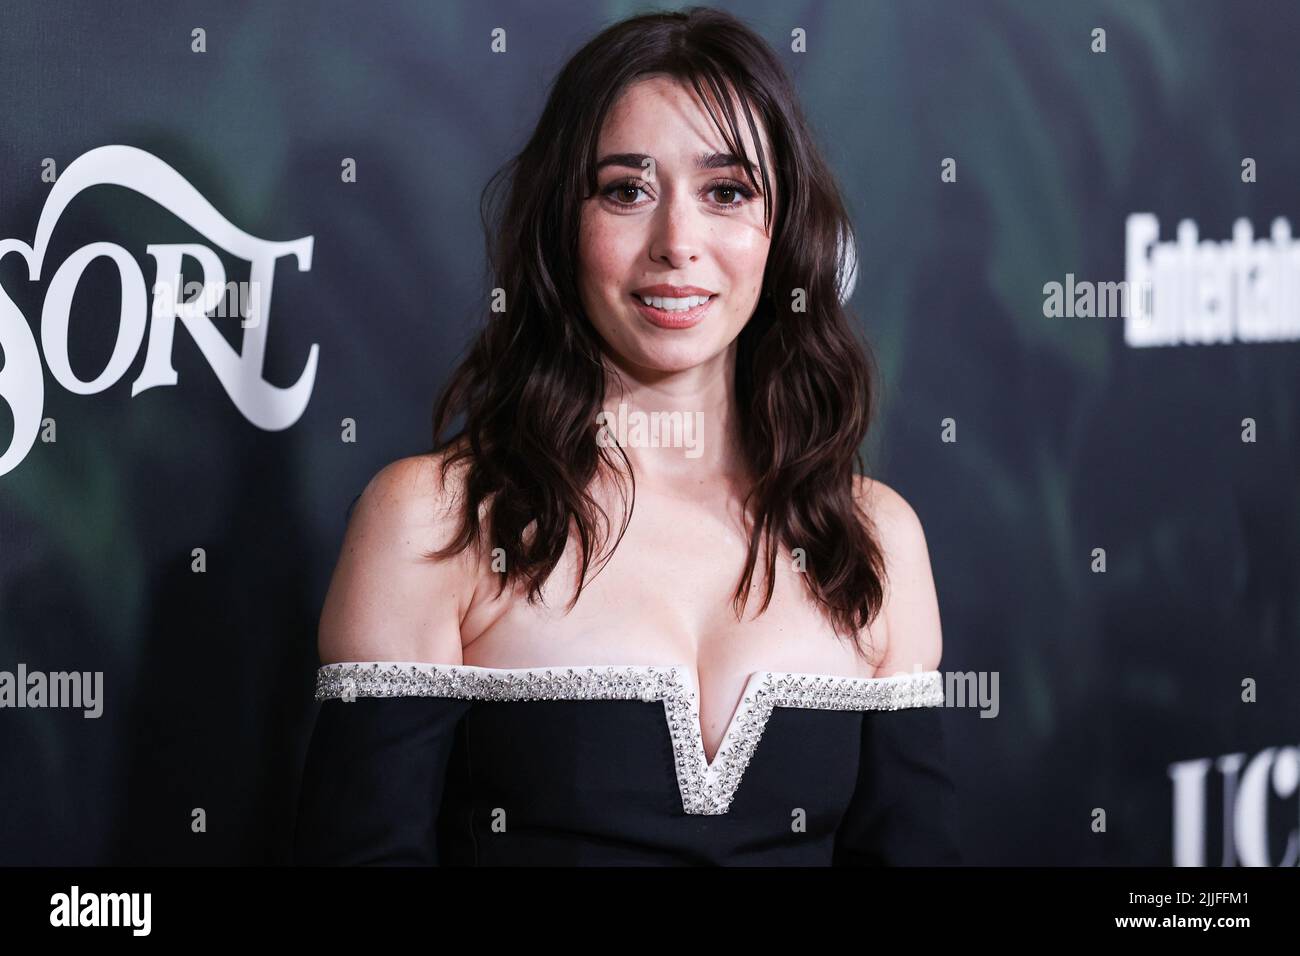 Hollywood, United States. 25th July, 2022. HOLLYWOOD, LOS ANGELES, CALIFORNIA, USA - JULY 25: American actress Cristin Milioti arrives at the Los Angeles Premiere Screening For Peacock's Original Series 'The Resort' hosted by Peacock, UCP and Entertainment Weekly held at The Hollywood Roosevelt Hotel on July 25, 2022 in Hollywood, Los Angeles, California, United States. (Photo by Xavier Collin/Image Press Agency) Credit: Image Press Agency/Alamy Live News Stock Photo